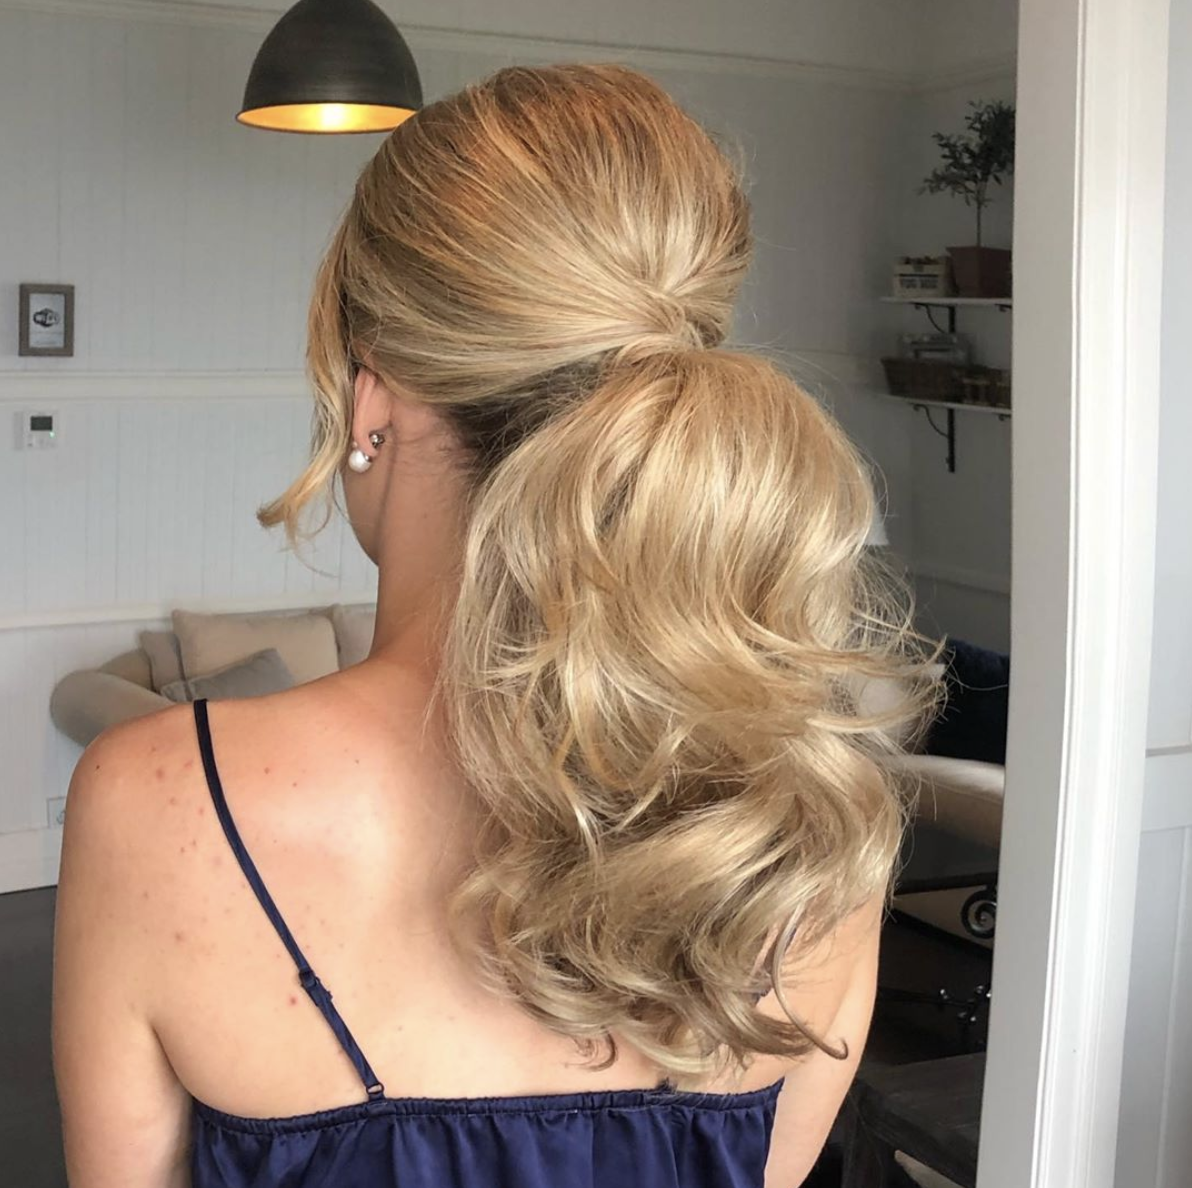 Top 5 hairstyle tutorials for wedding guests - Hair Romance